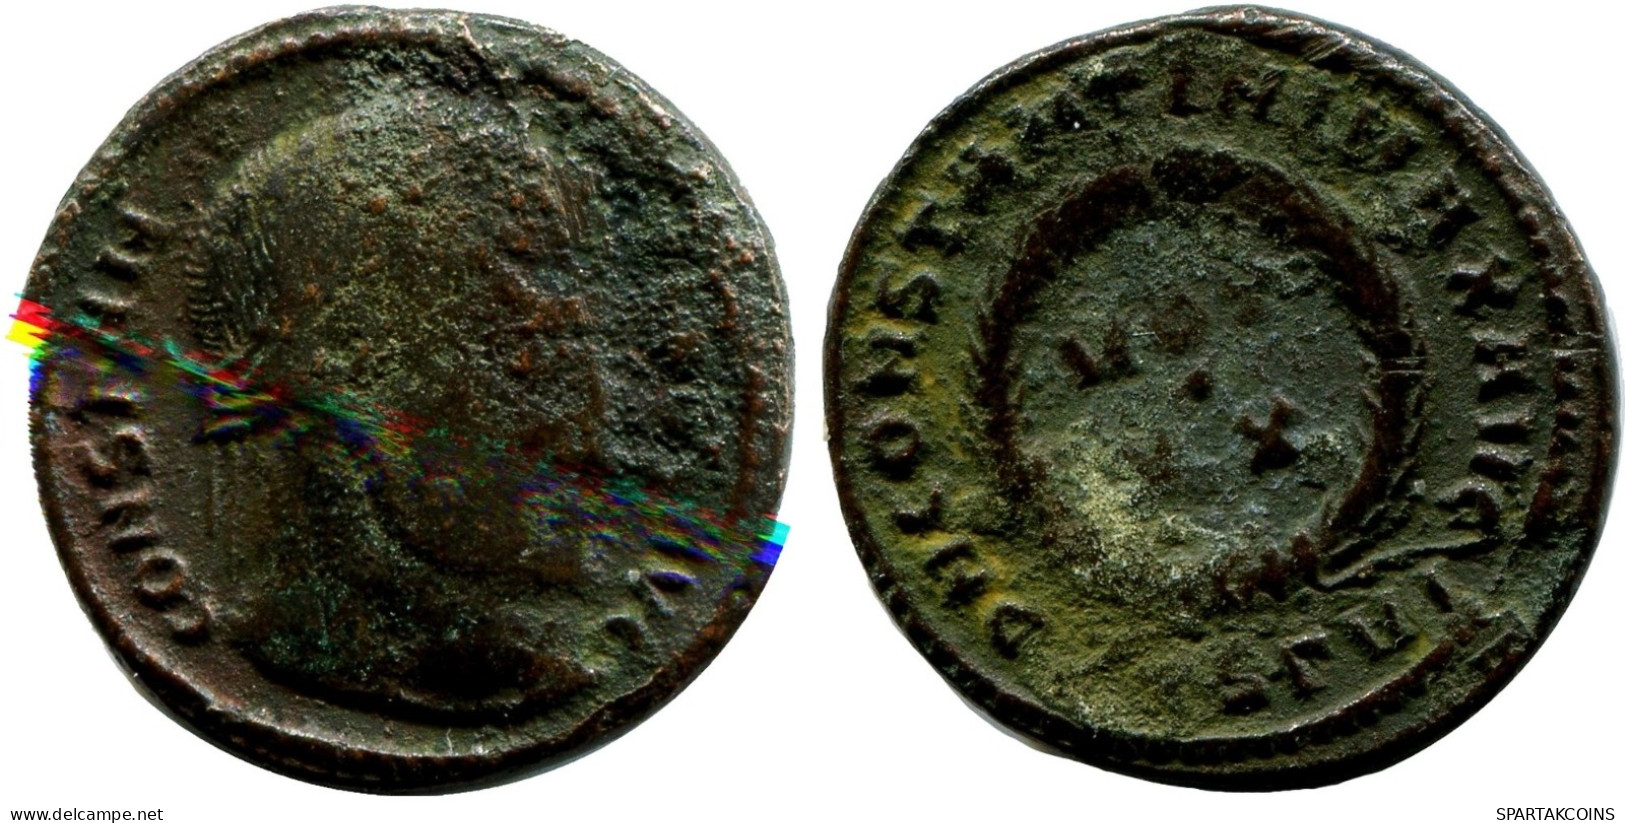 CONSTANTINE I THESSALONICA FROM THE ROYAL ONTARIO MUSEUM #ANC11124.14.U.A - The Christian Empire (307 AD Tot 363 AD)